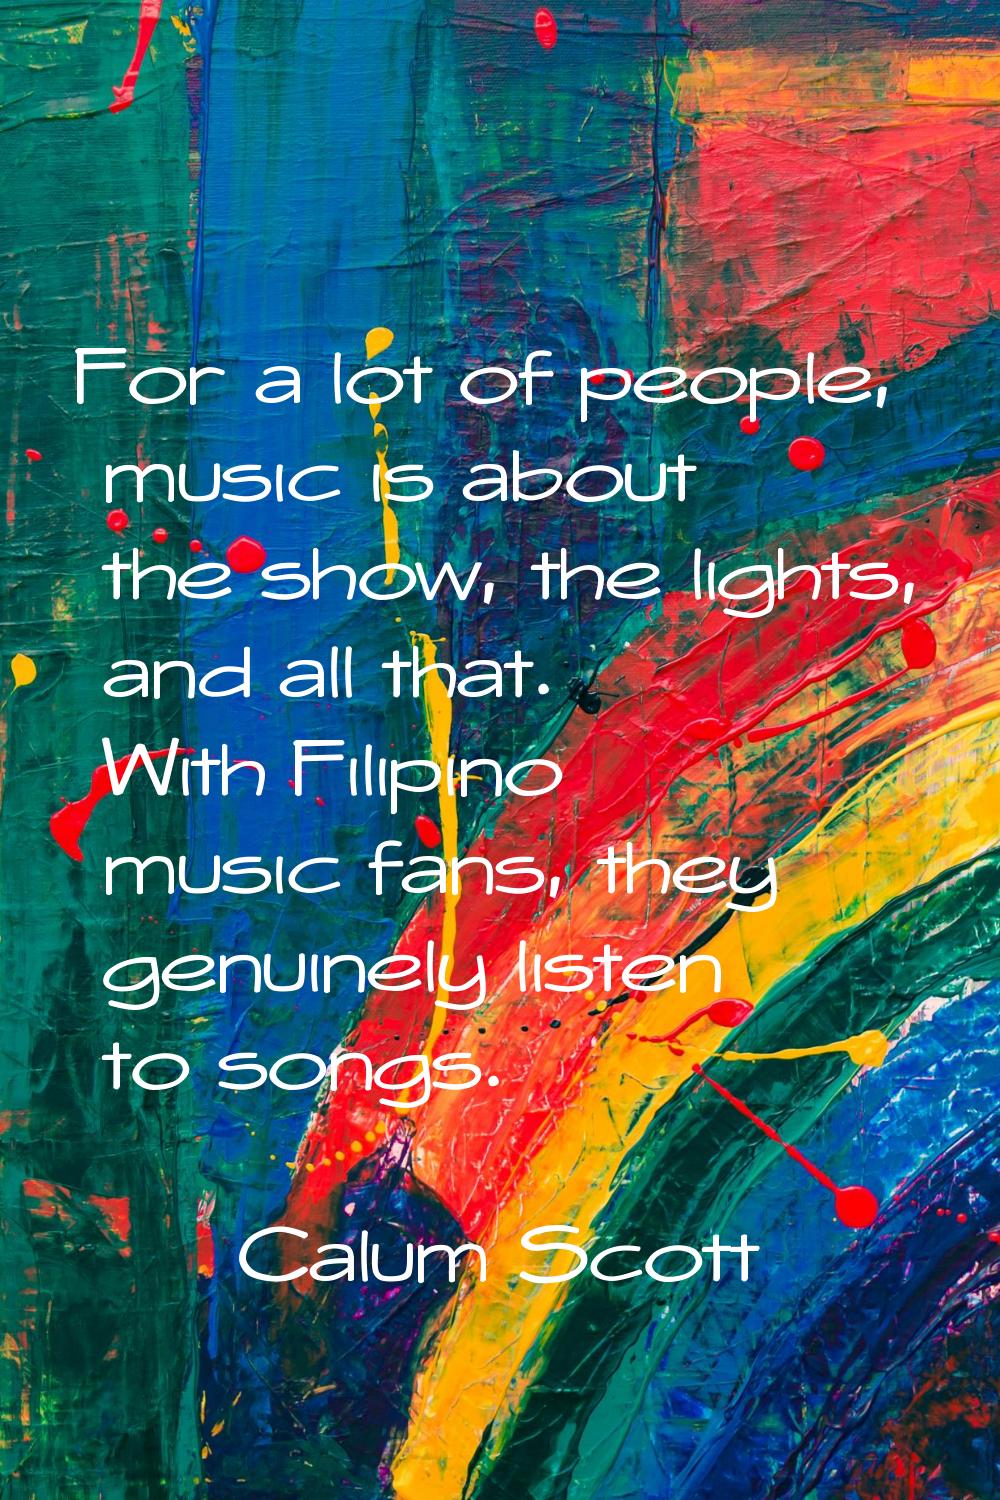 For a lot of people, music is about the show, the lights, and all that. With Filipino music fans, t